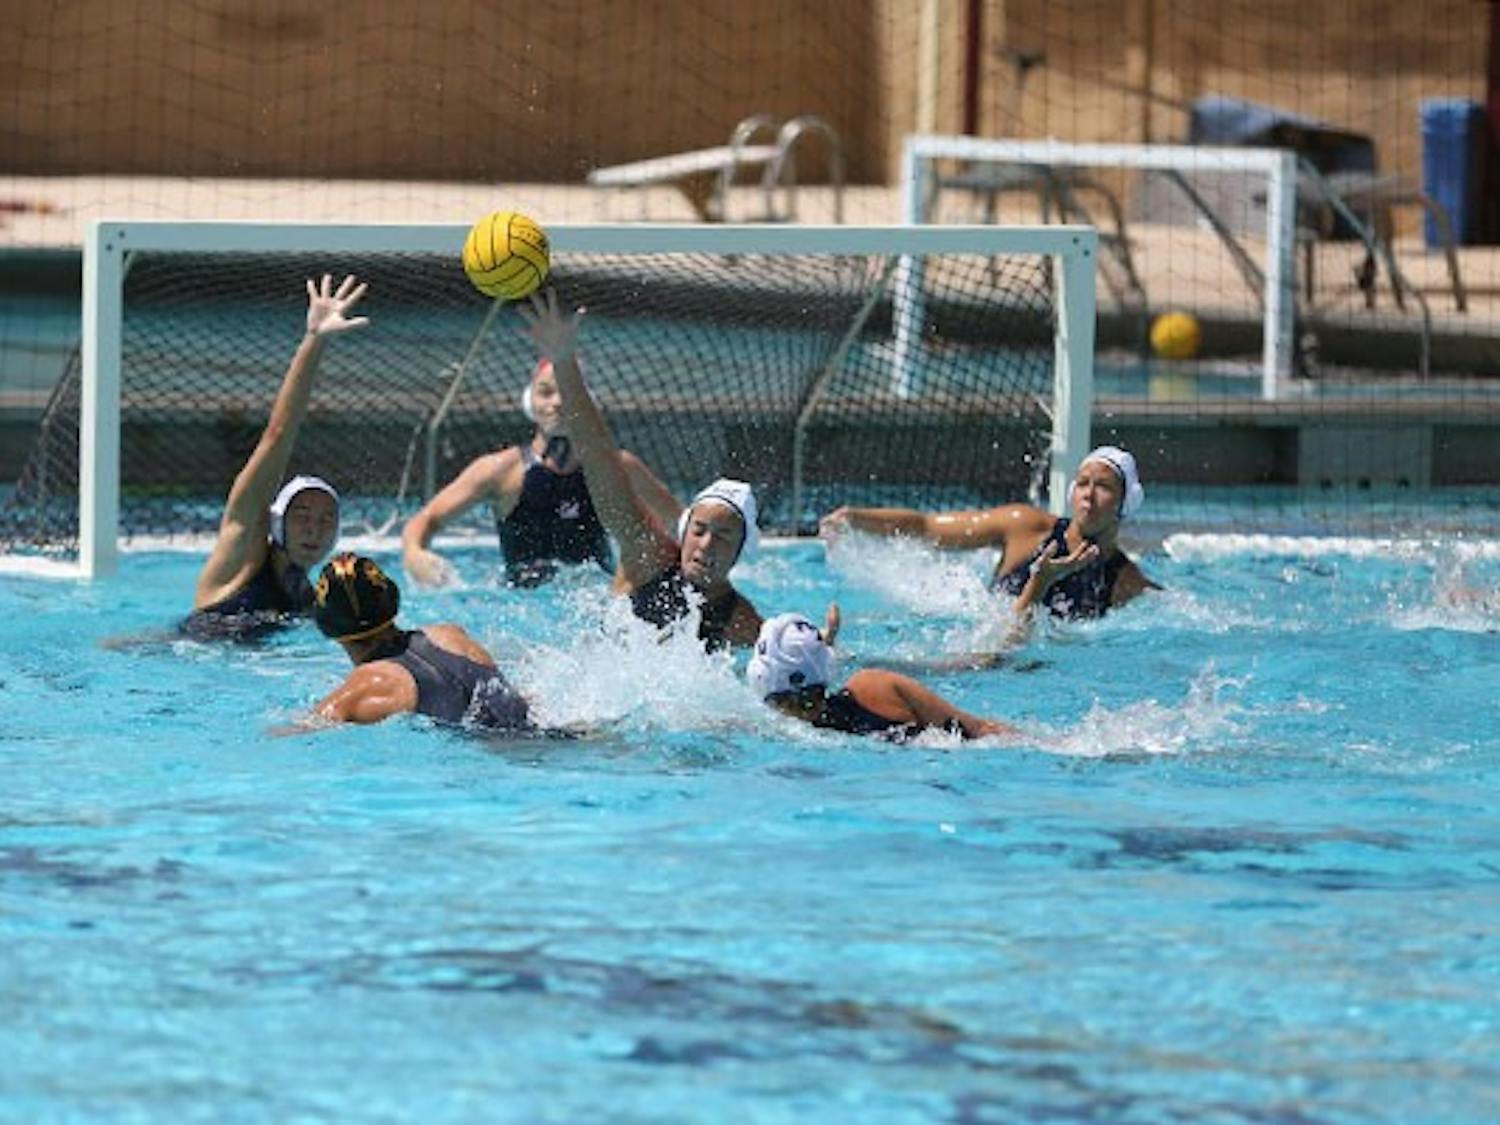 A California player blocks a shot by freshman attacker Izabella Chiappani at a home game on April 12. (Photo by Arianna Grainey)